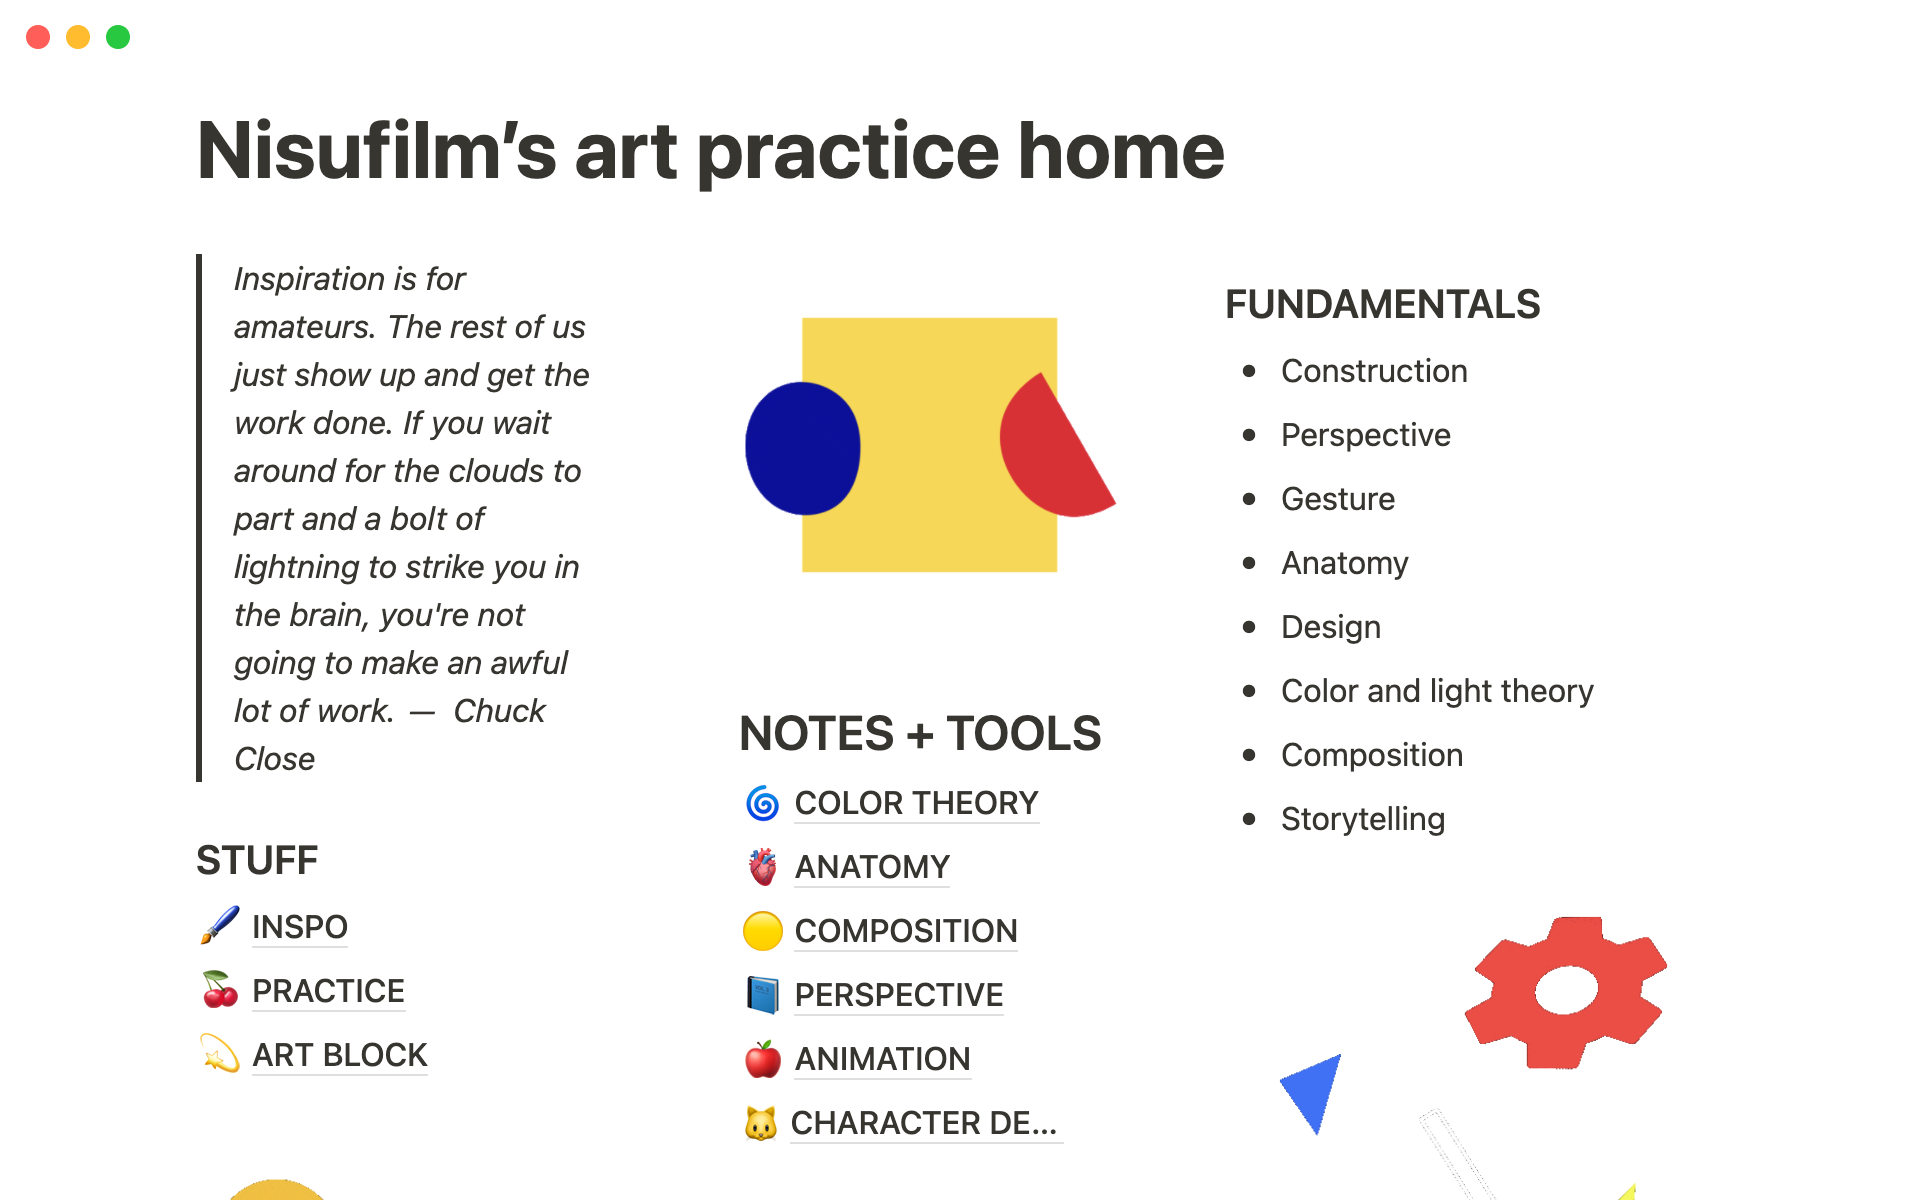 Keep track of all your art learning resources and inspiration.